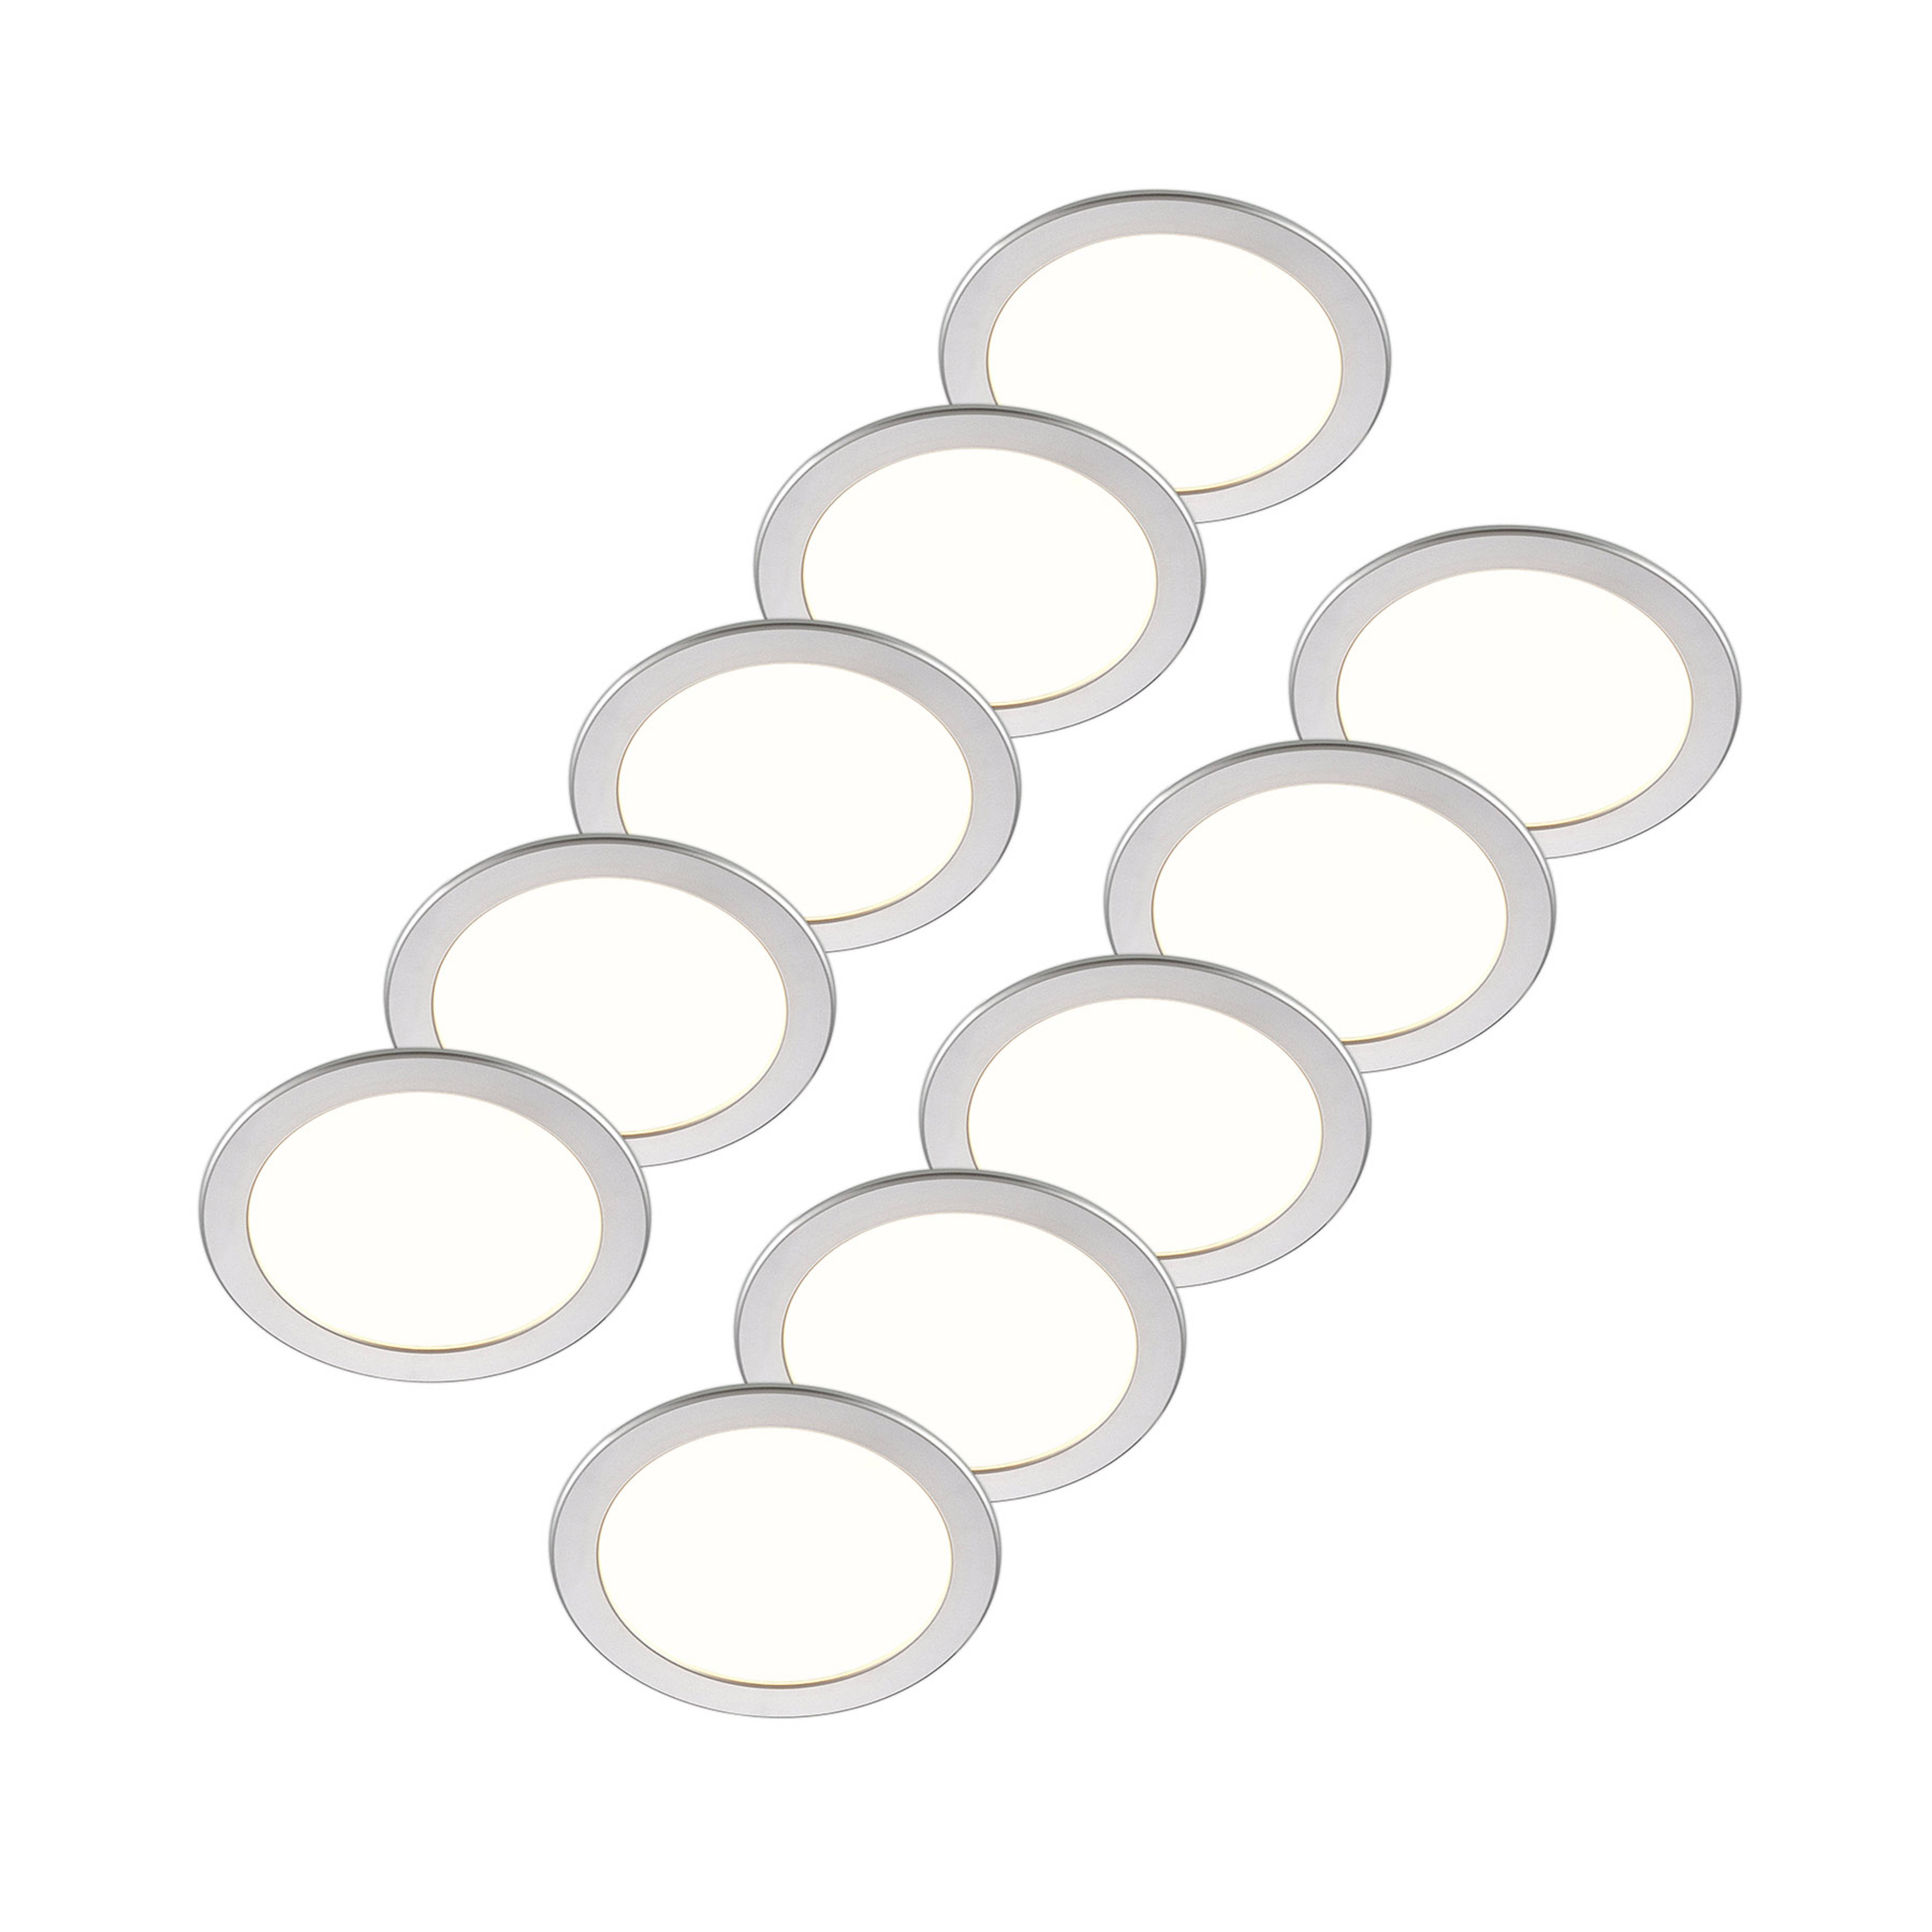 Prios LED recessed light Cadance, silver, 22cm, 10pcs, dimmable